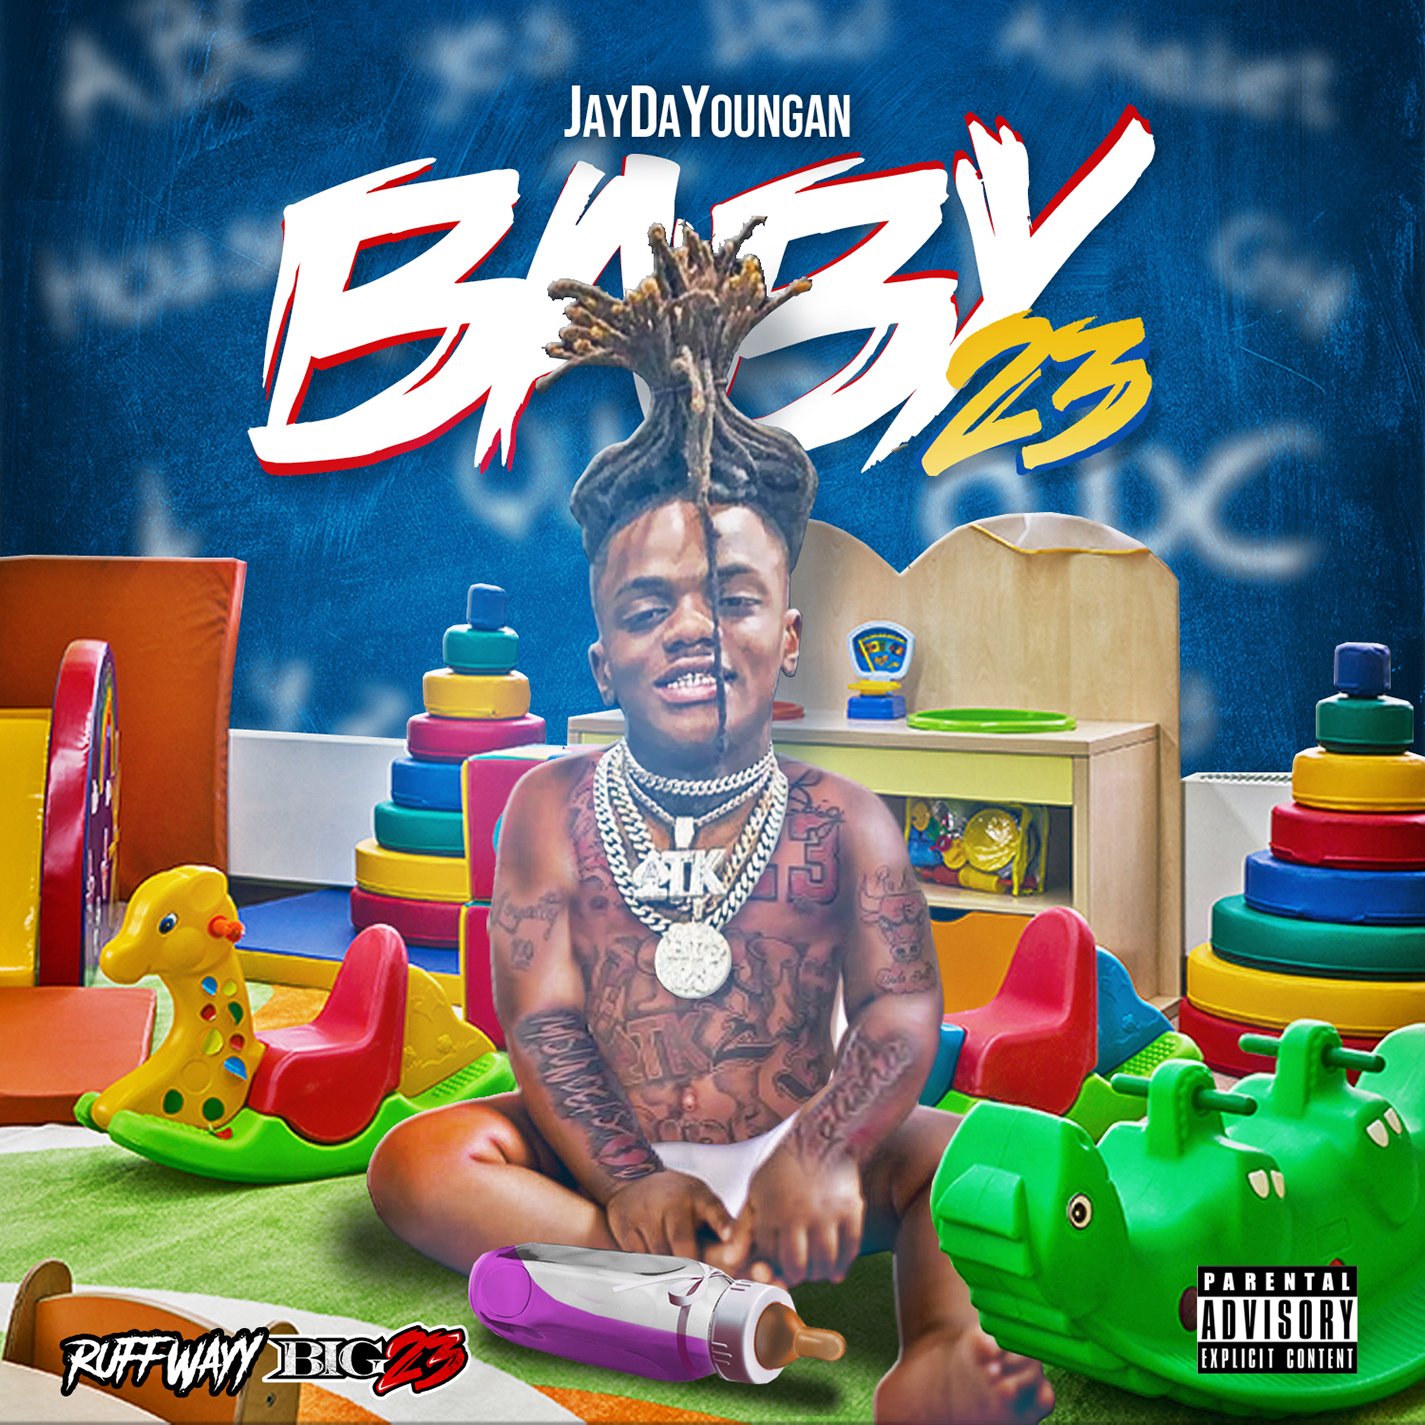 JayDaYoungan Releases Debut Album “Baby23” With Kevin Gates, Moneybagg Yo, & More